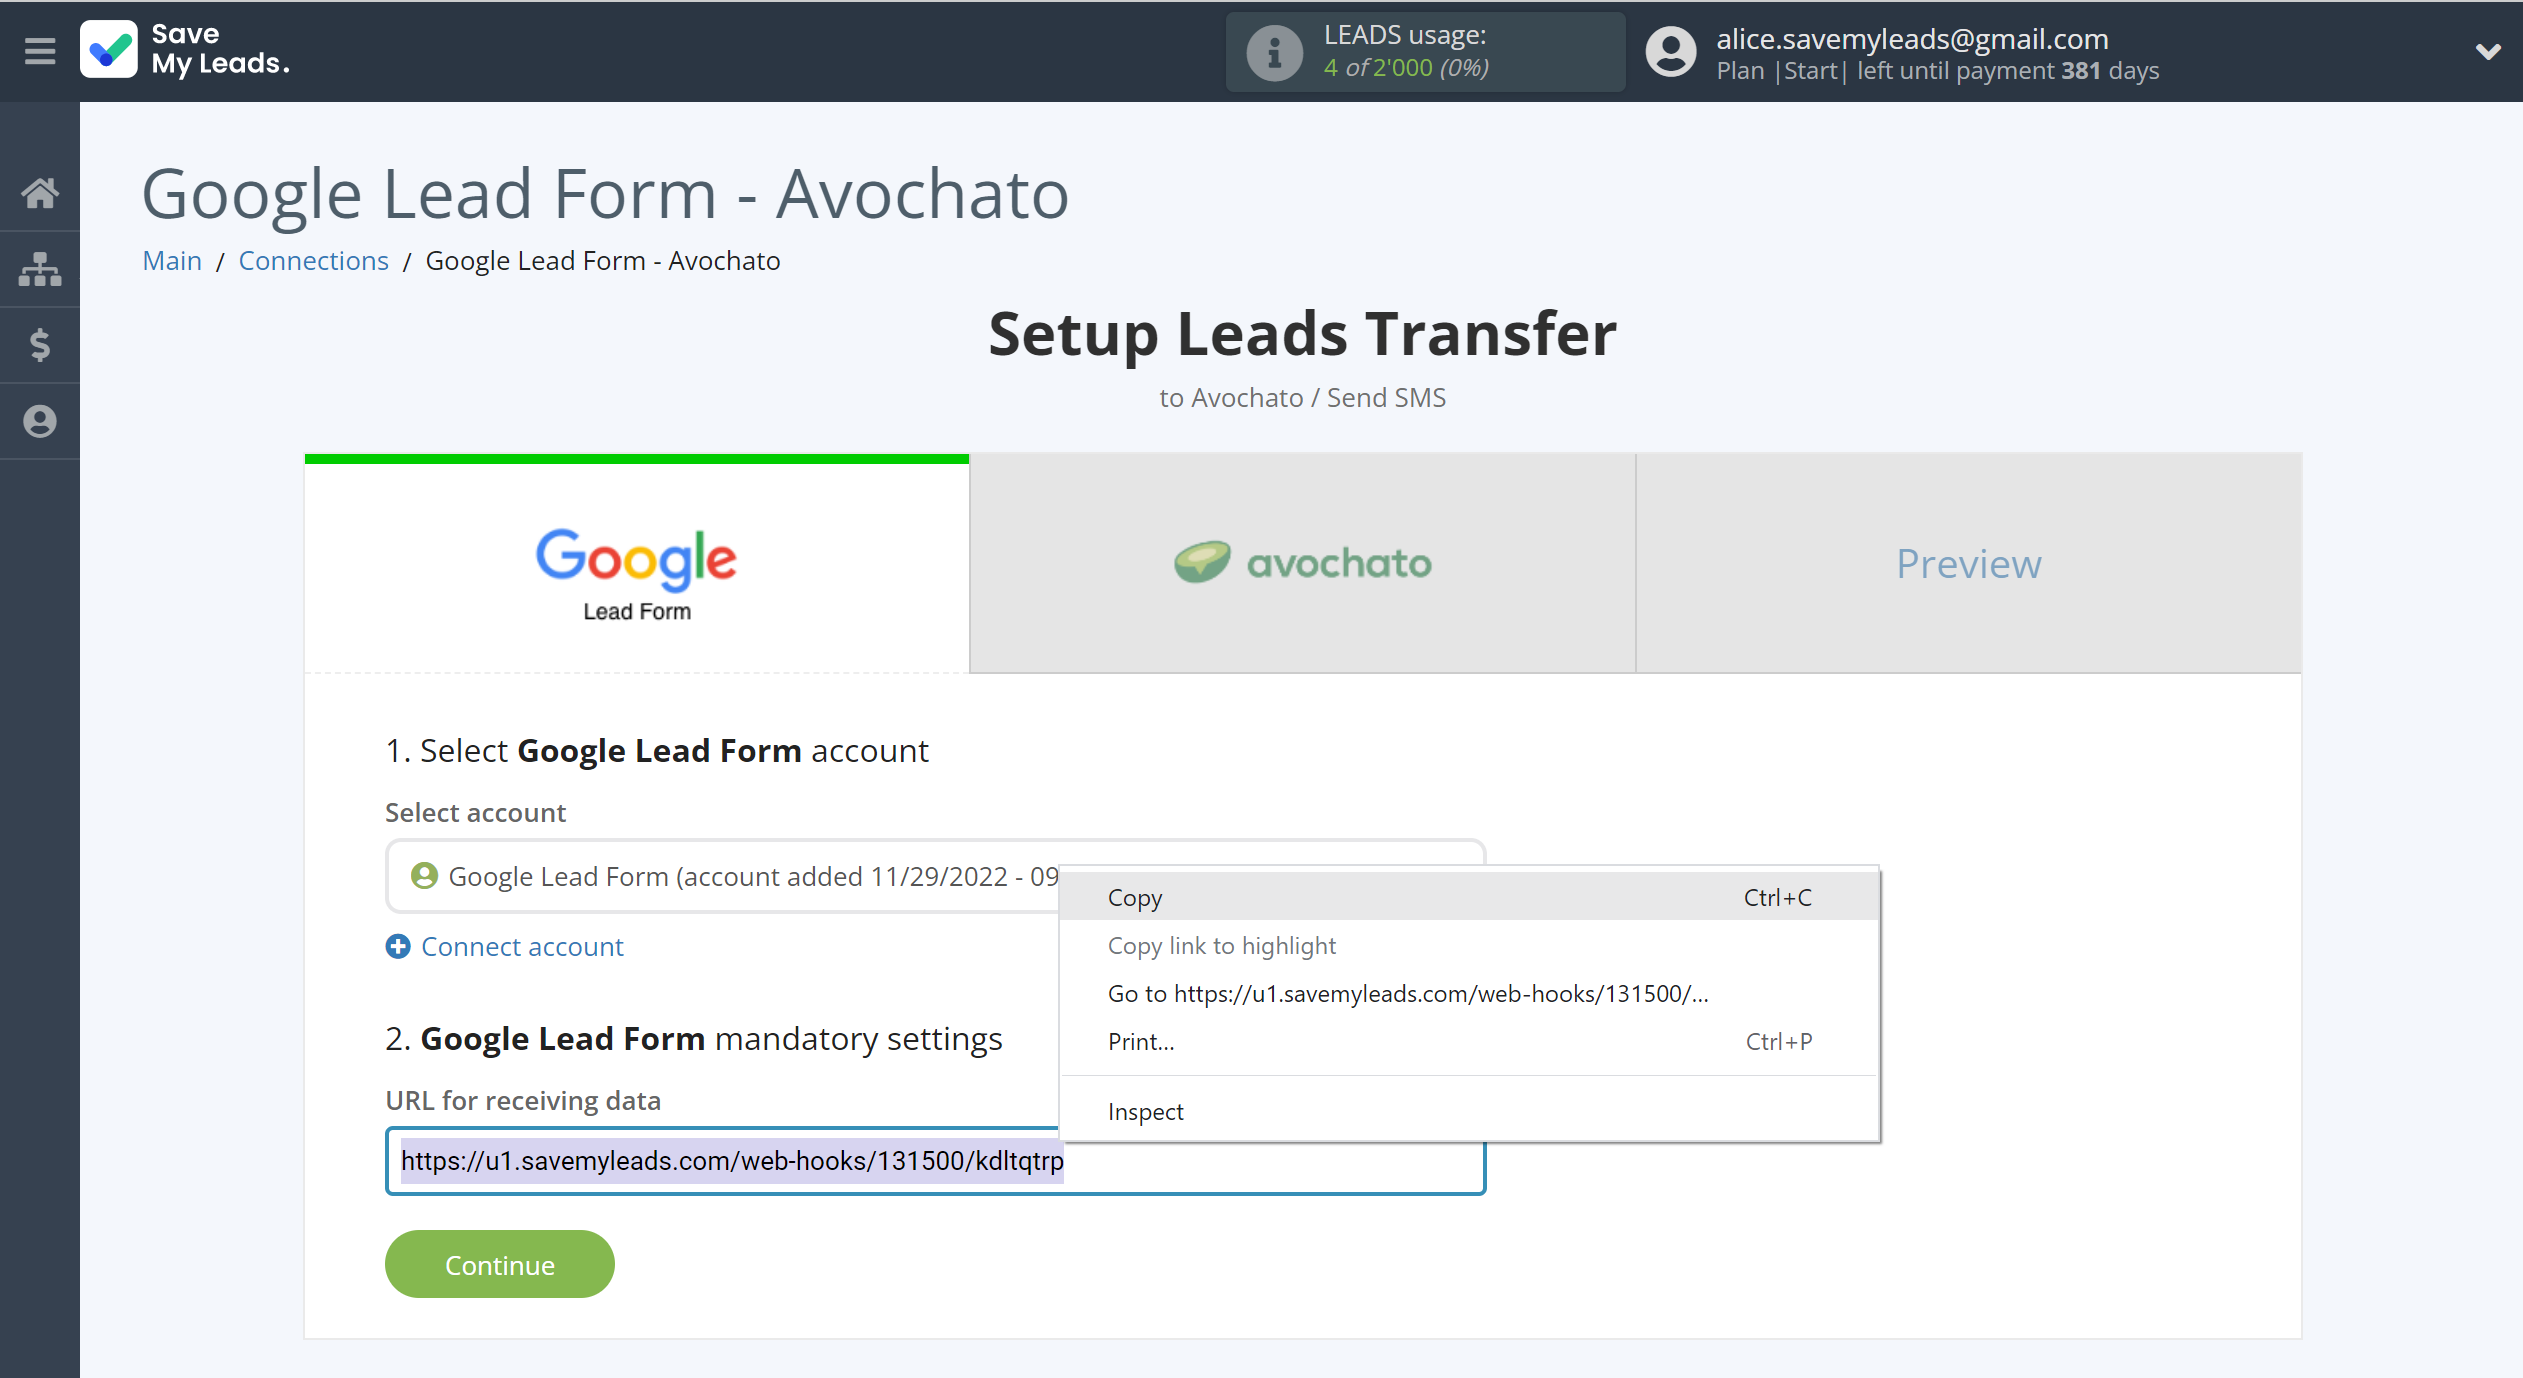 How to Connect Google Lead Form with Avochato | Data Source account connection